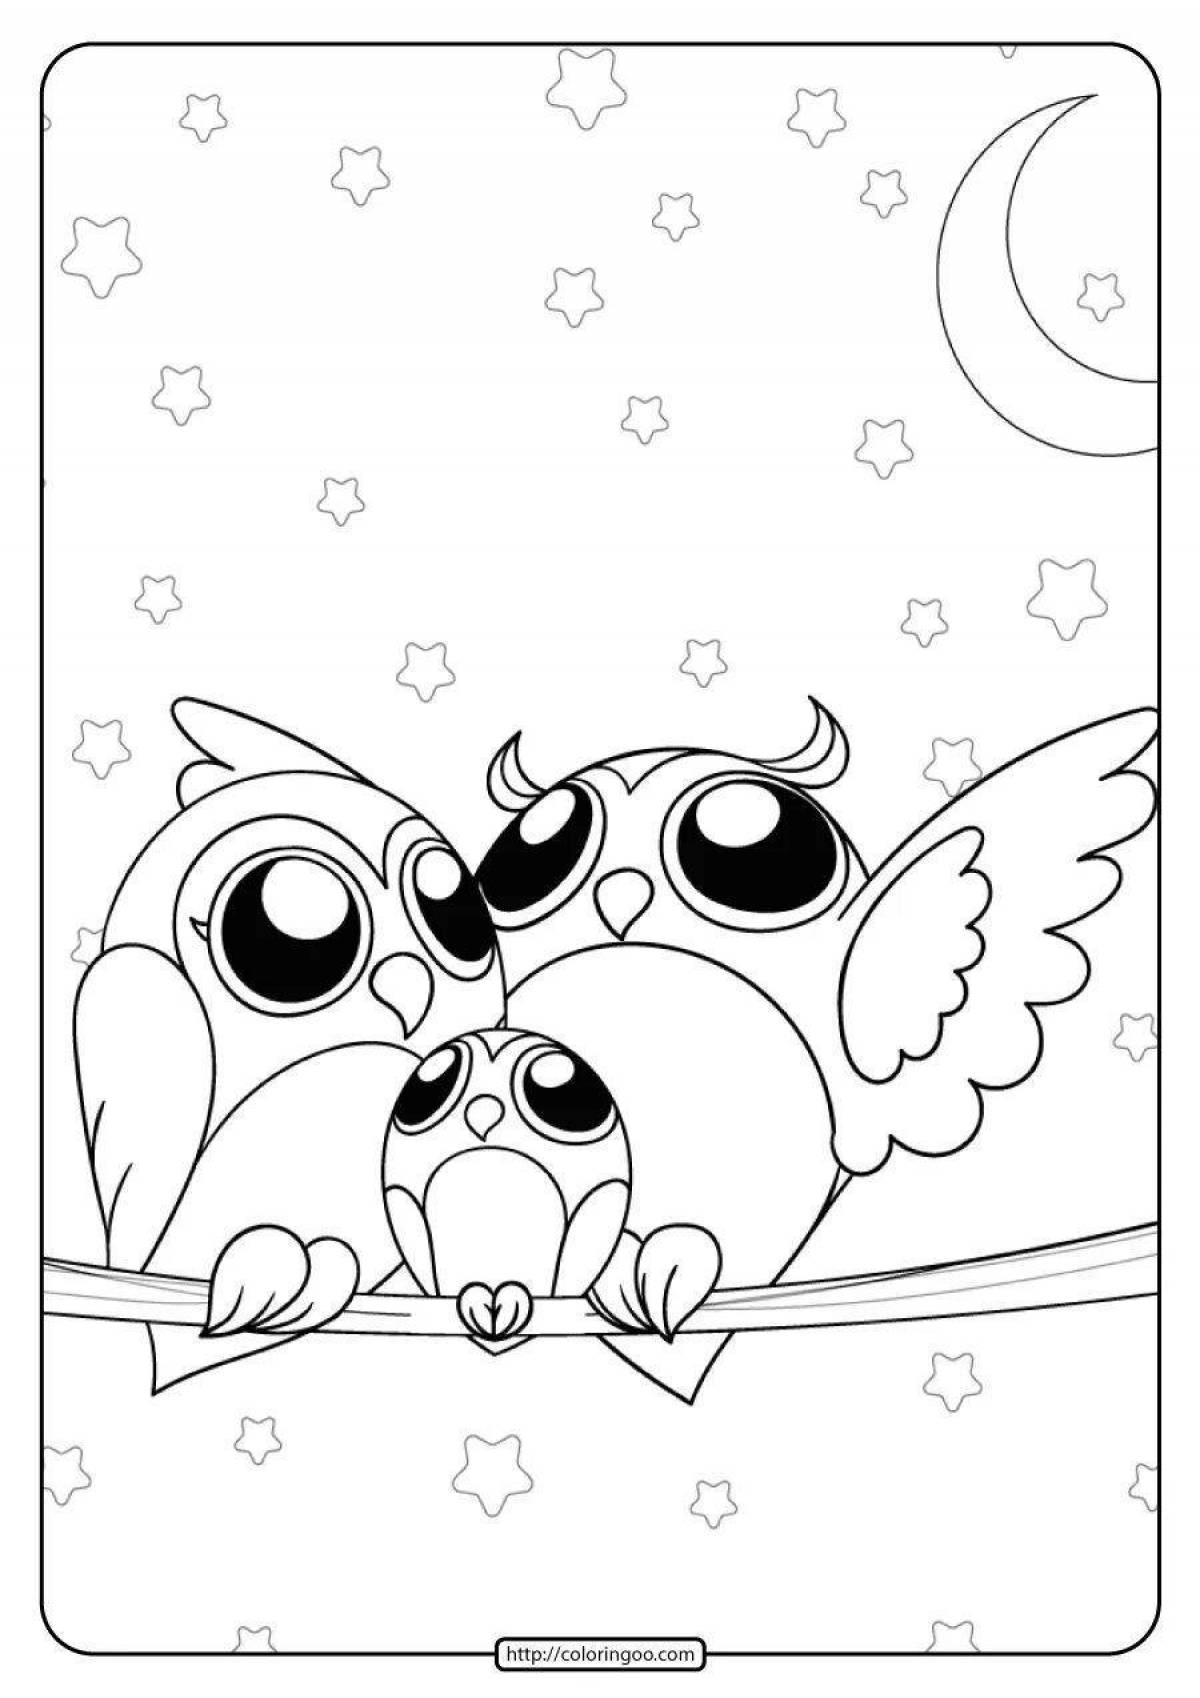 Amazing hip hop owlet coloring page